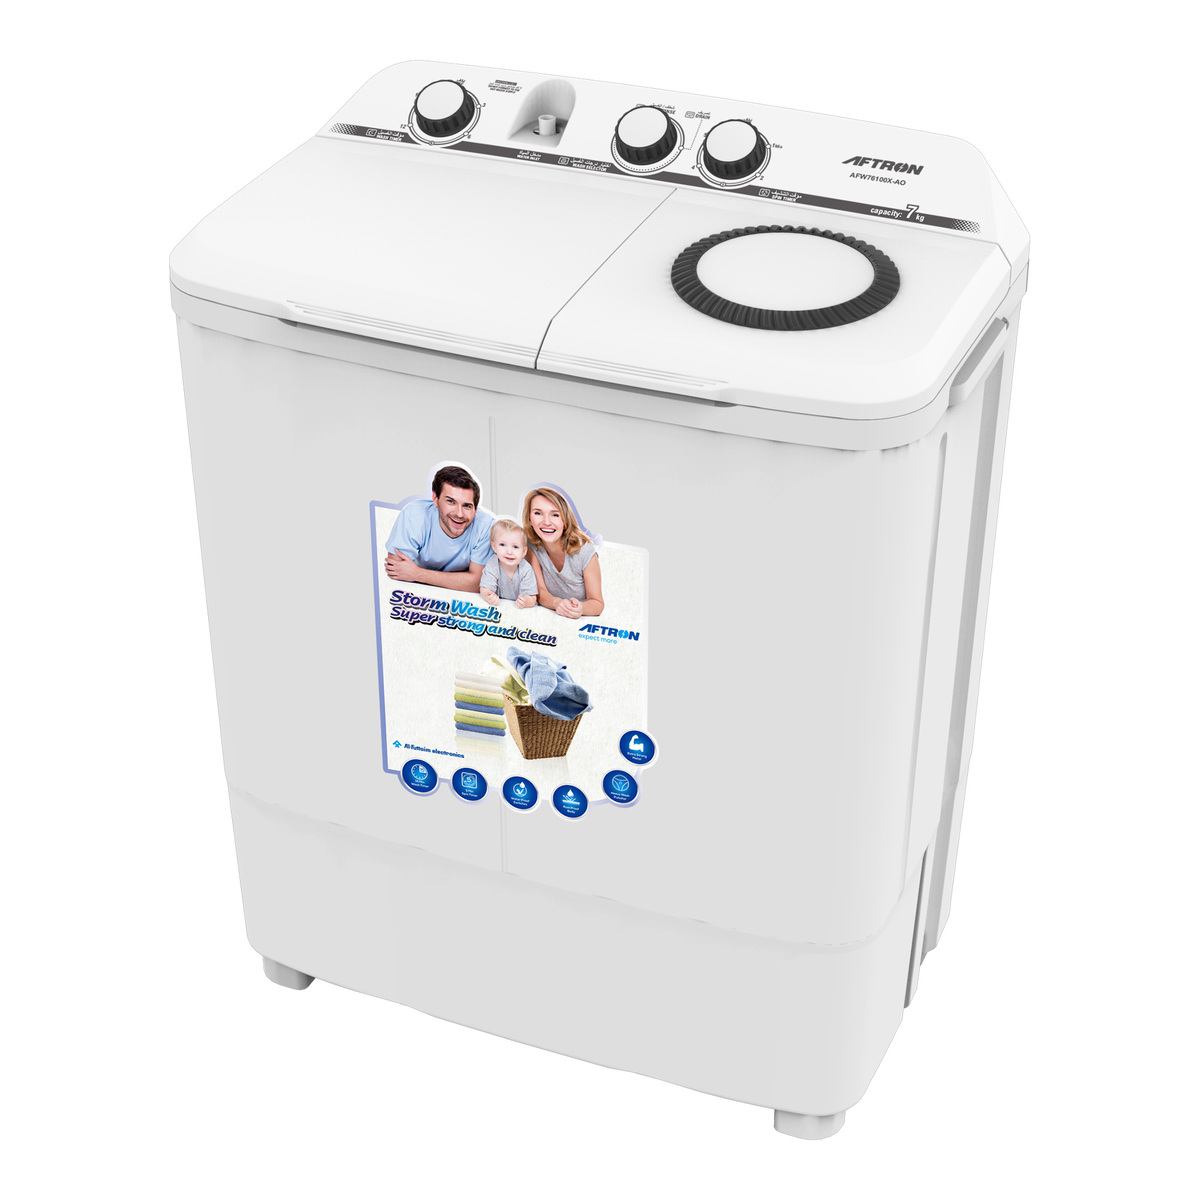 Aftron Top Load Semi Automatic Washing Machine, 7 Kg, White, AFW76100